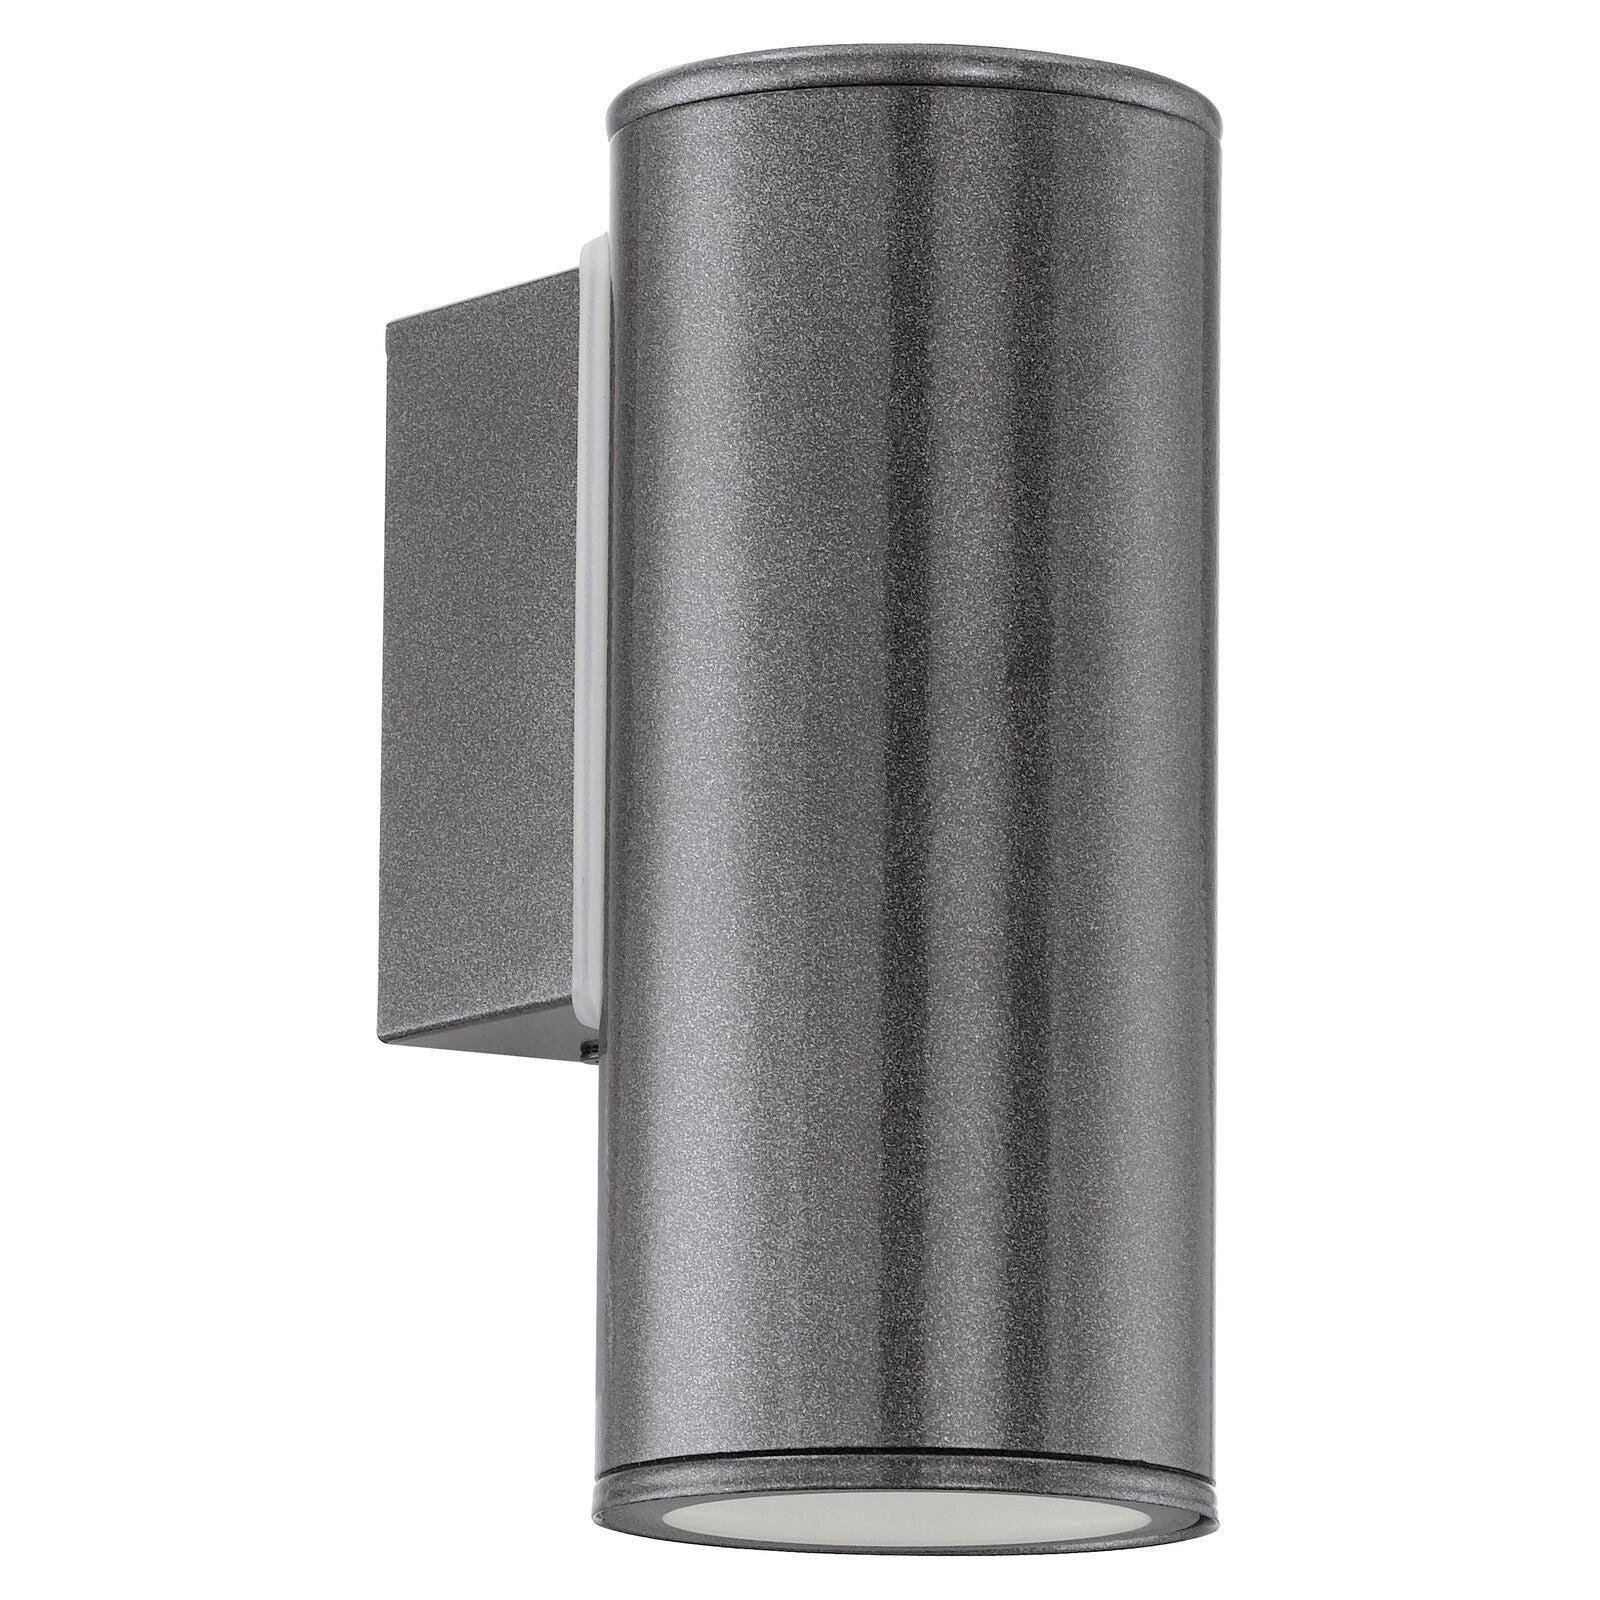 IP44 Outdoor Wall Light Anthracite Zinc Plated Steel 1 x 3W GU10 Bulb - image 1